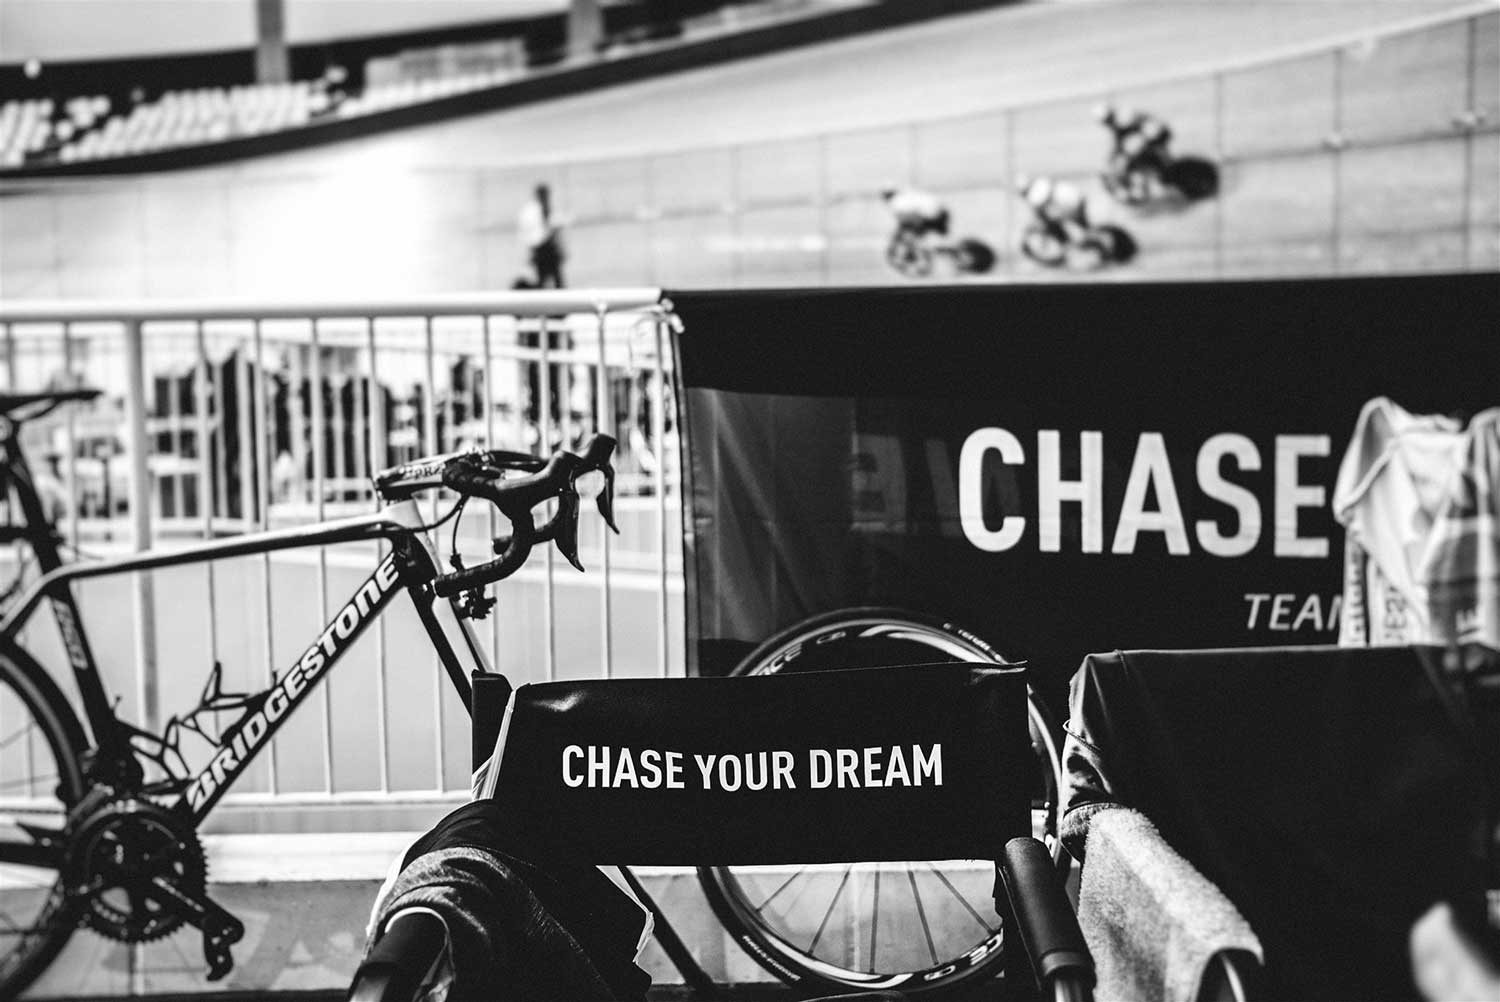 Empty seat with Chase Your Dream written on it to motivate cyclists during National Keirin Championships at Izu Velodrome